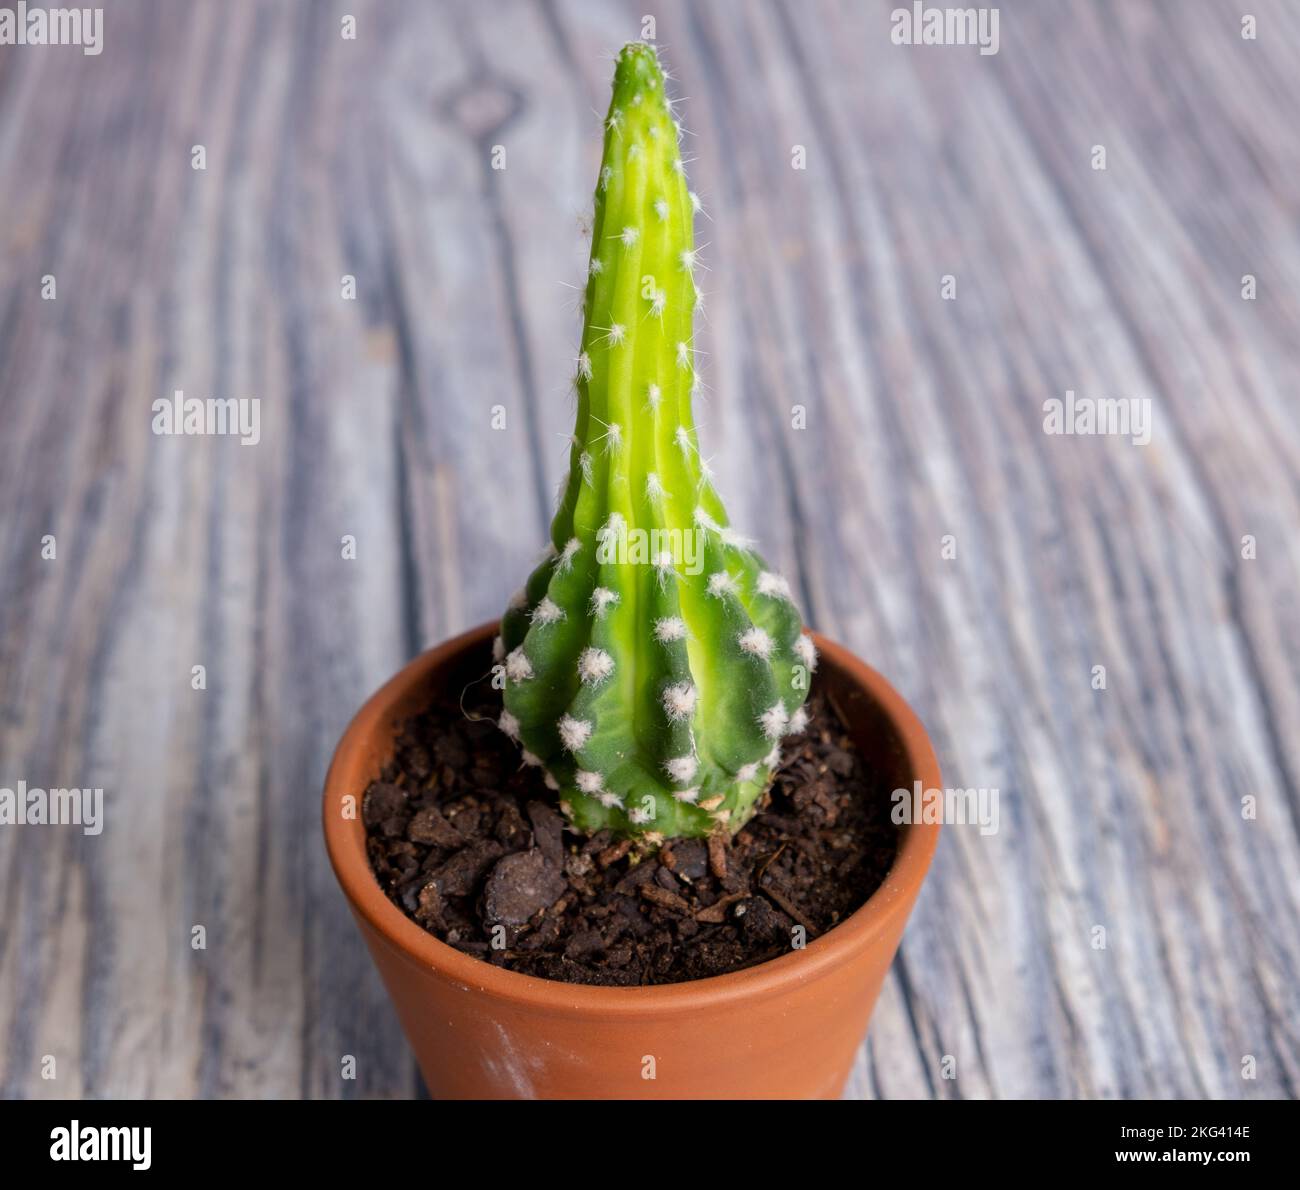 Cactus in a vase isolated on wood Stock Photo